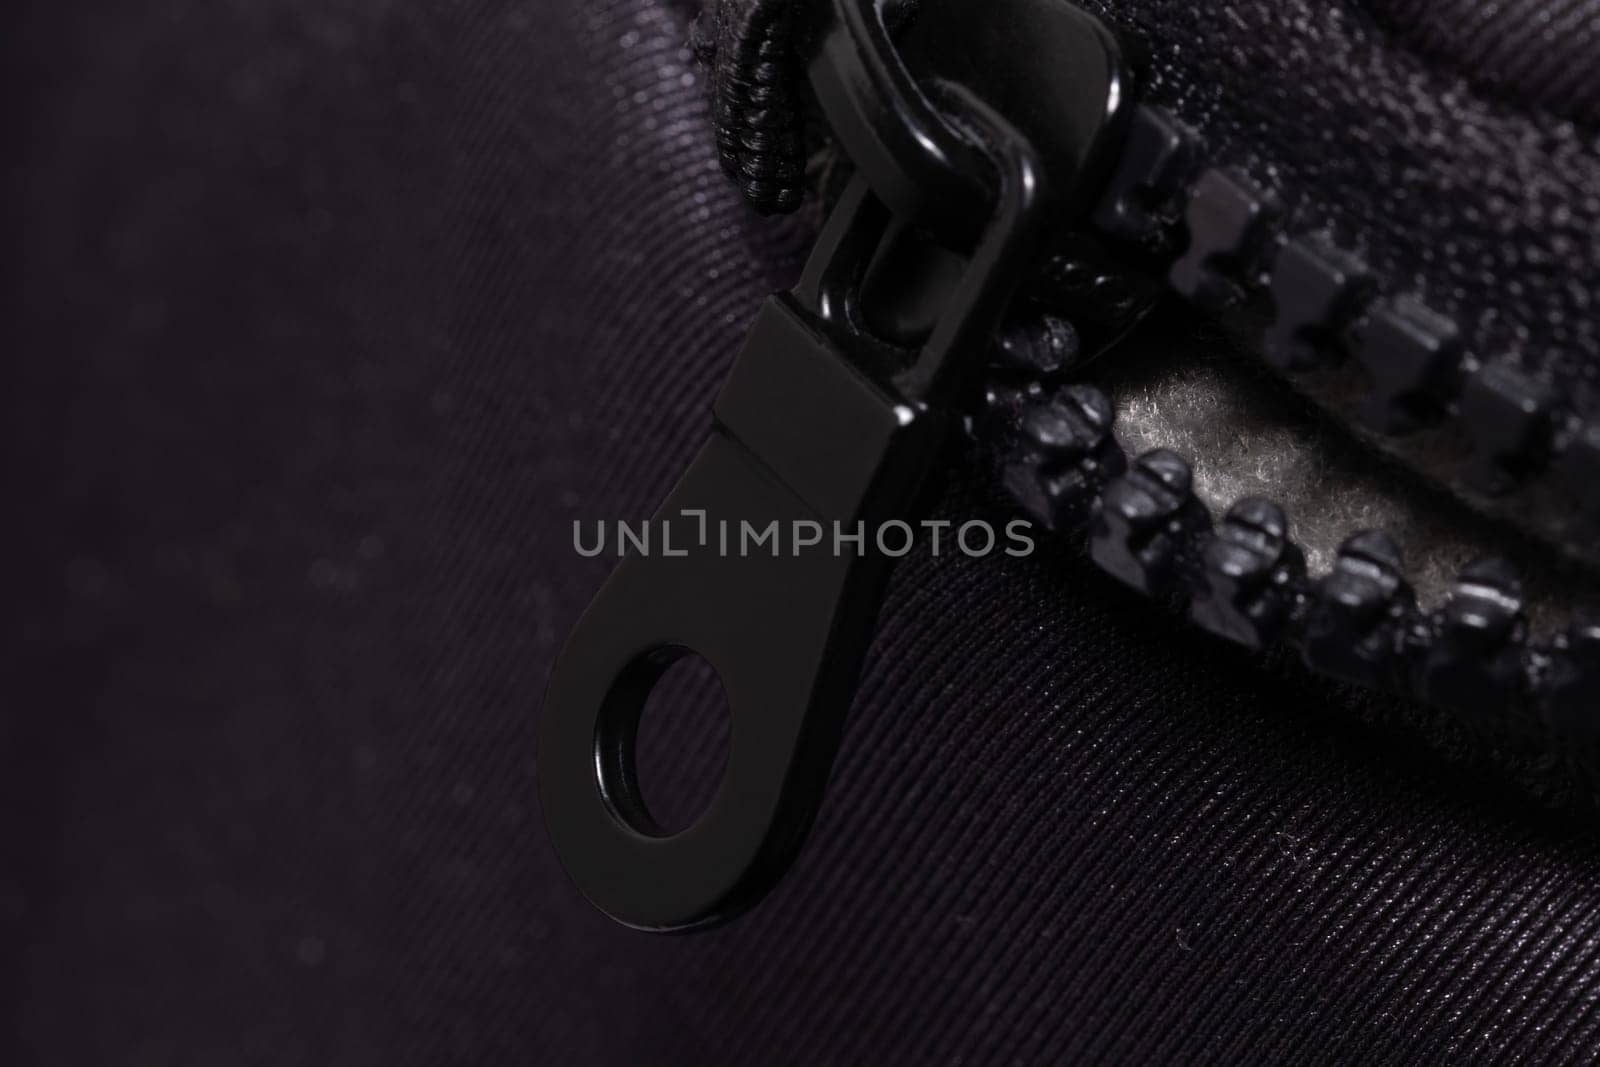 Close-Up View of a Black Zipper on a Textured Fabric Surface by clusterx